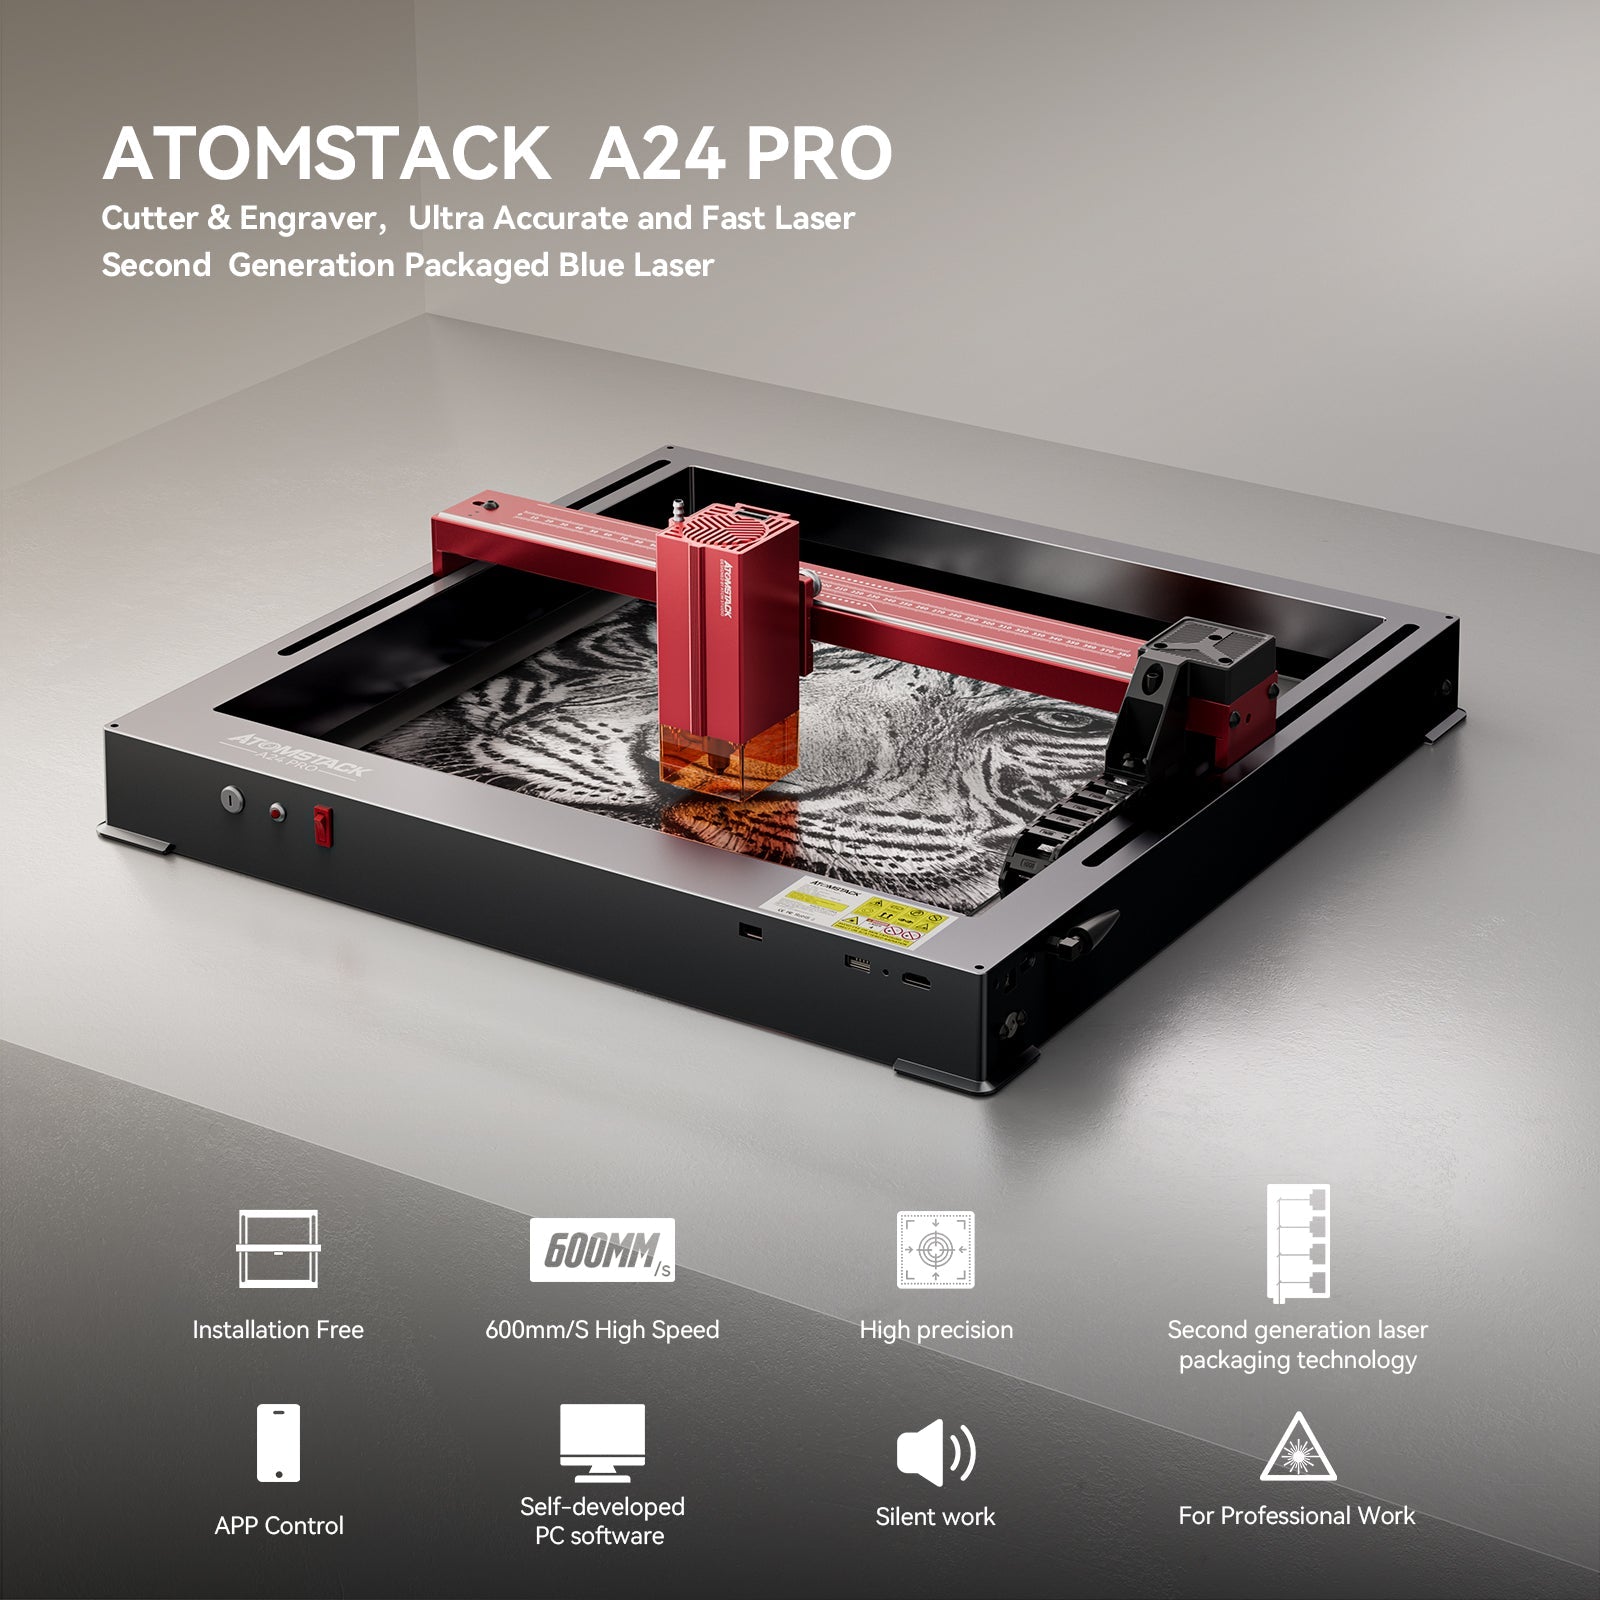 AtomStack A24 Pro Laser Engraver with B3 Enclosure, F60 Air Assist and Free F4 Honeycomb